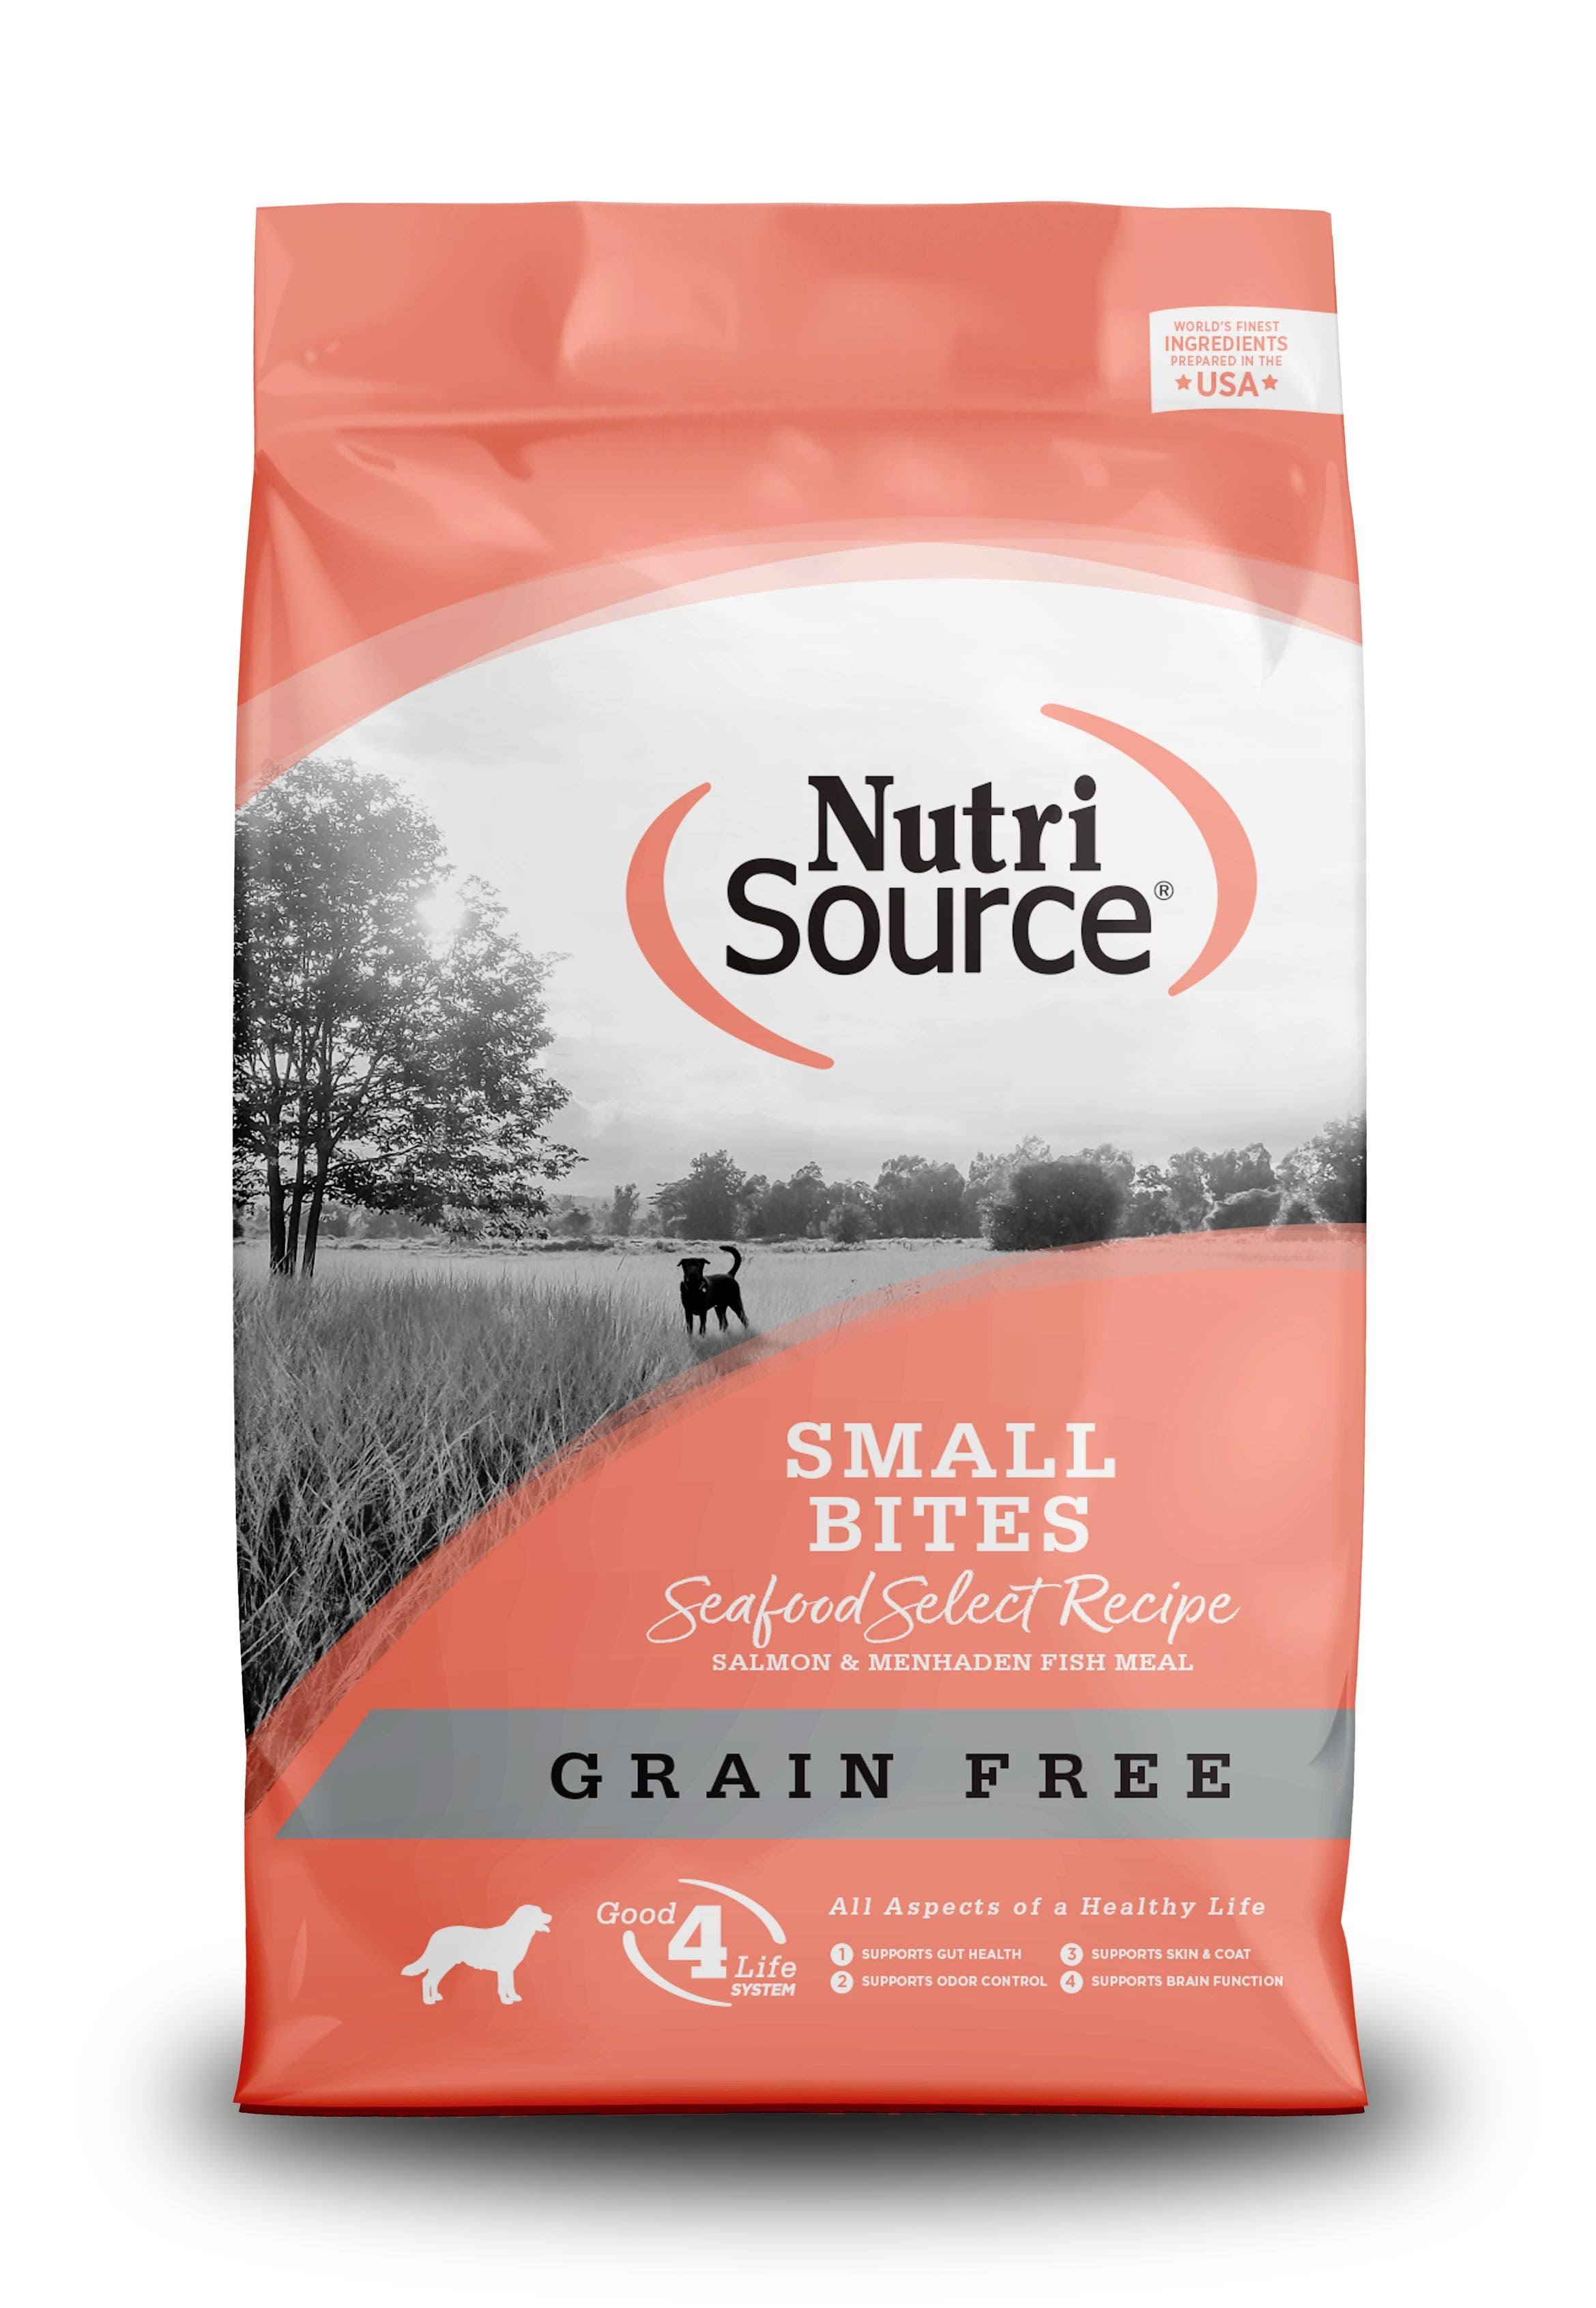 Nature's Variety Nutri Source Small Breed Seafood Select Grain Free Dog Food